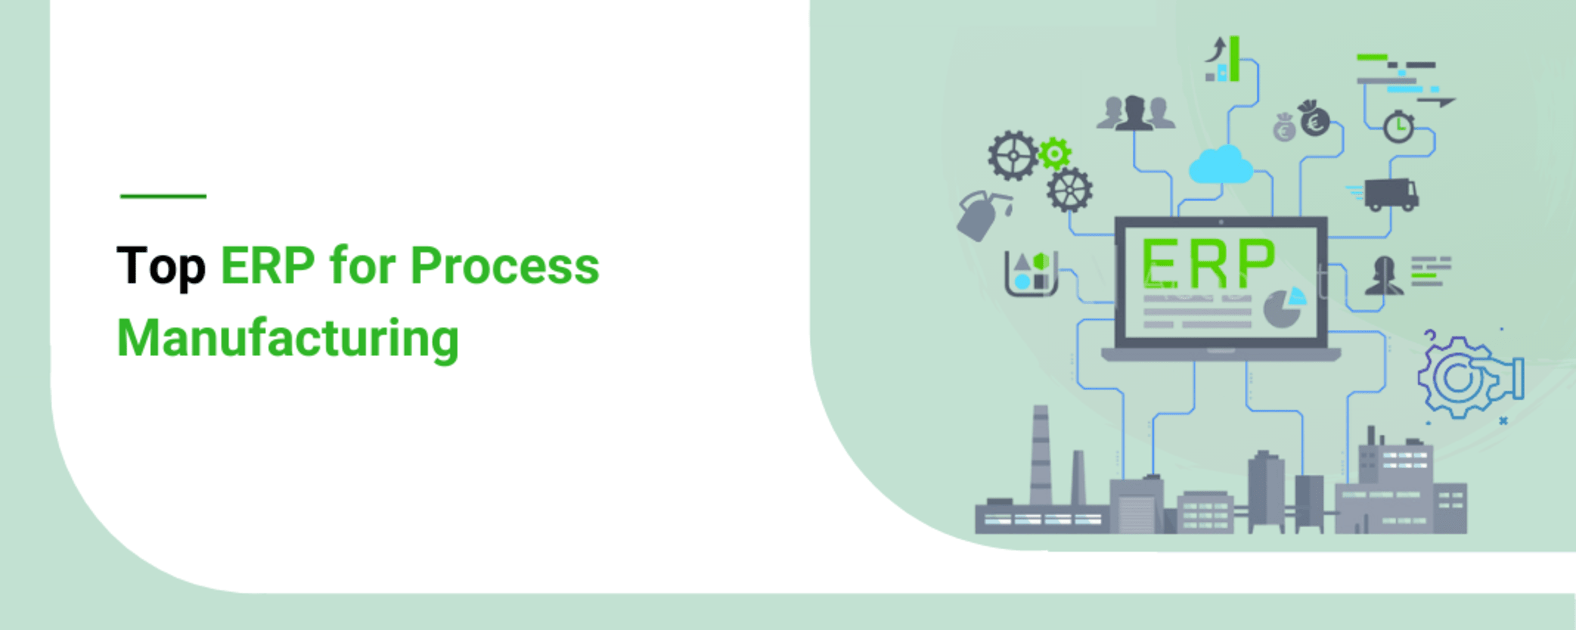 Top 8 ERP for Process Manufacturing